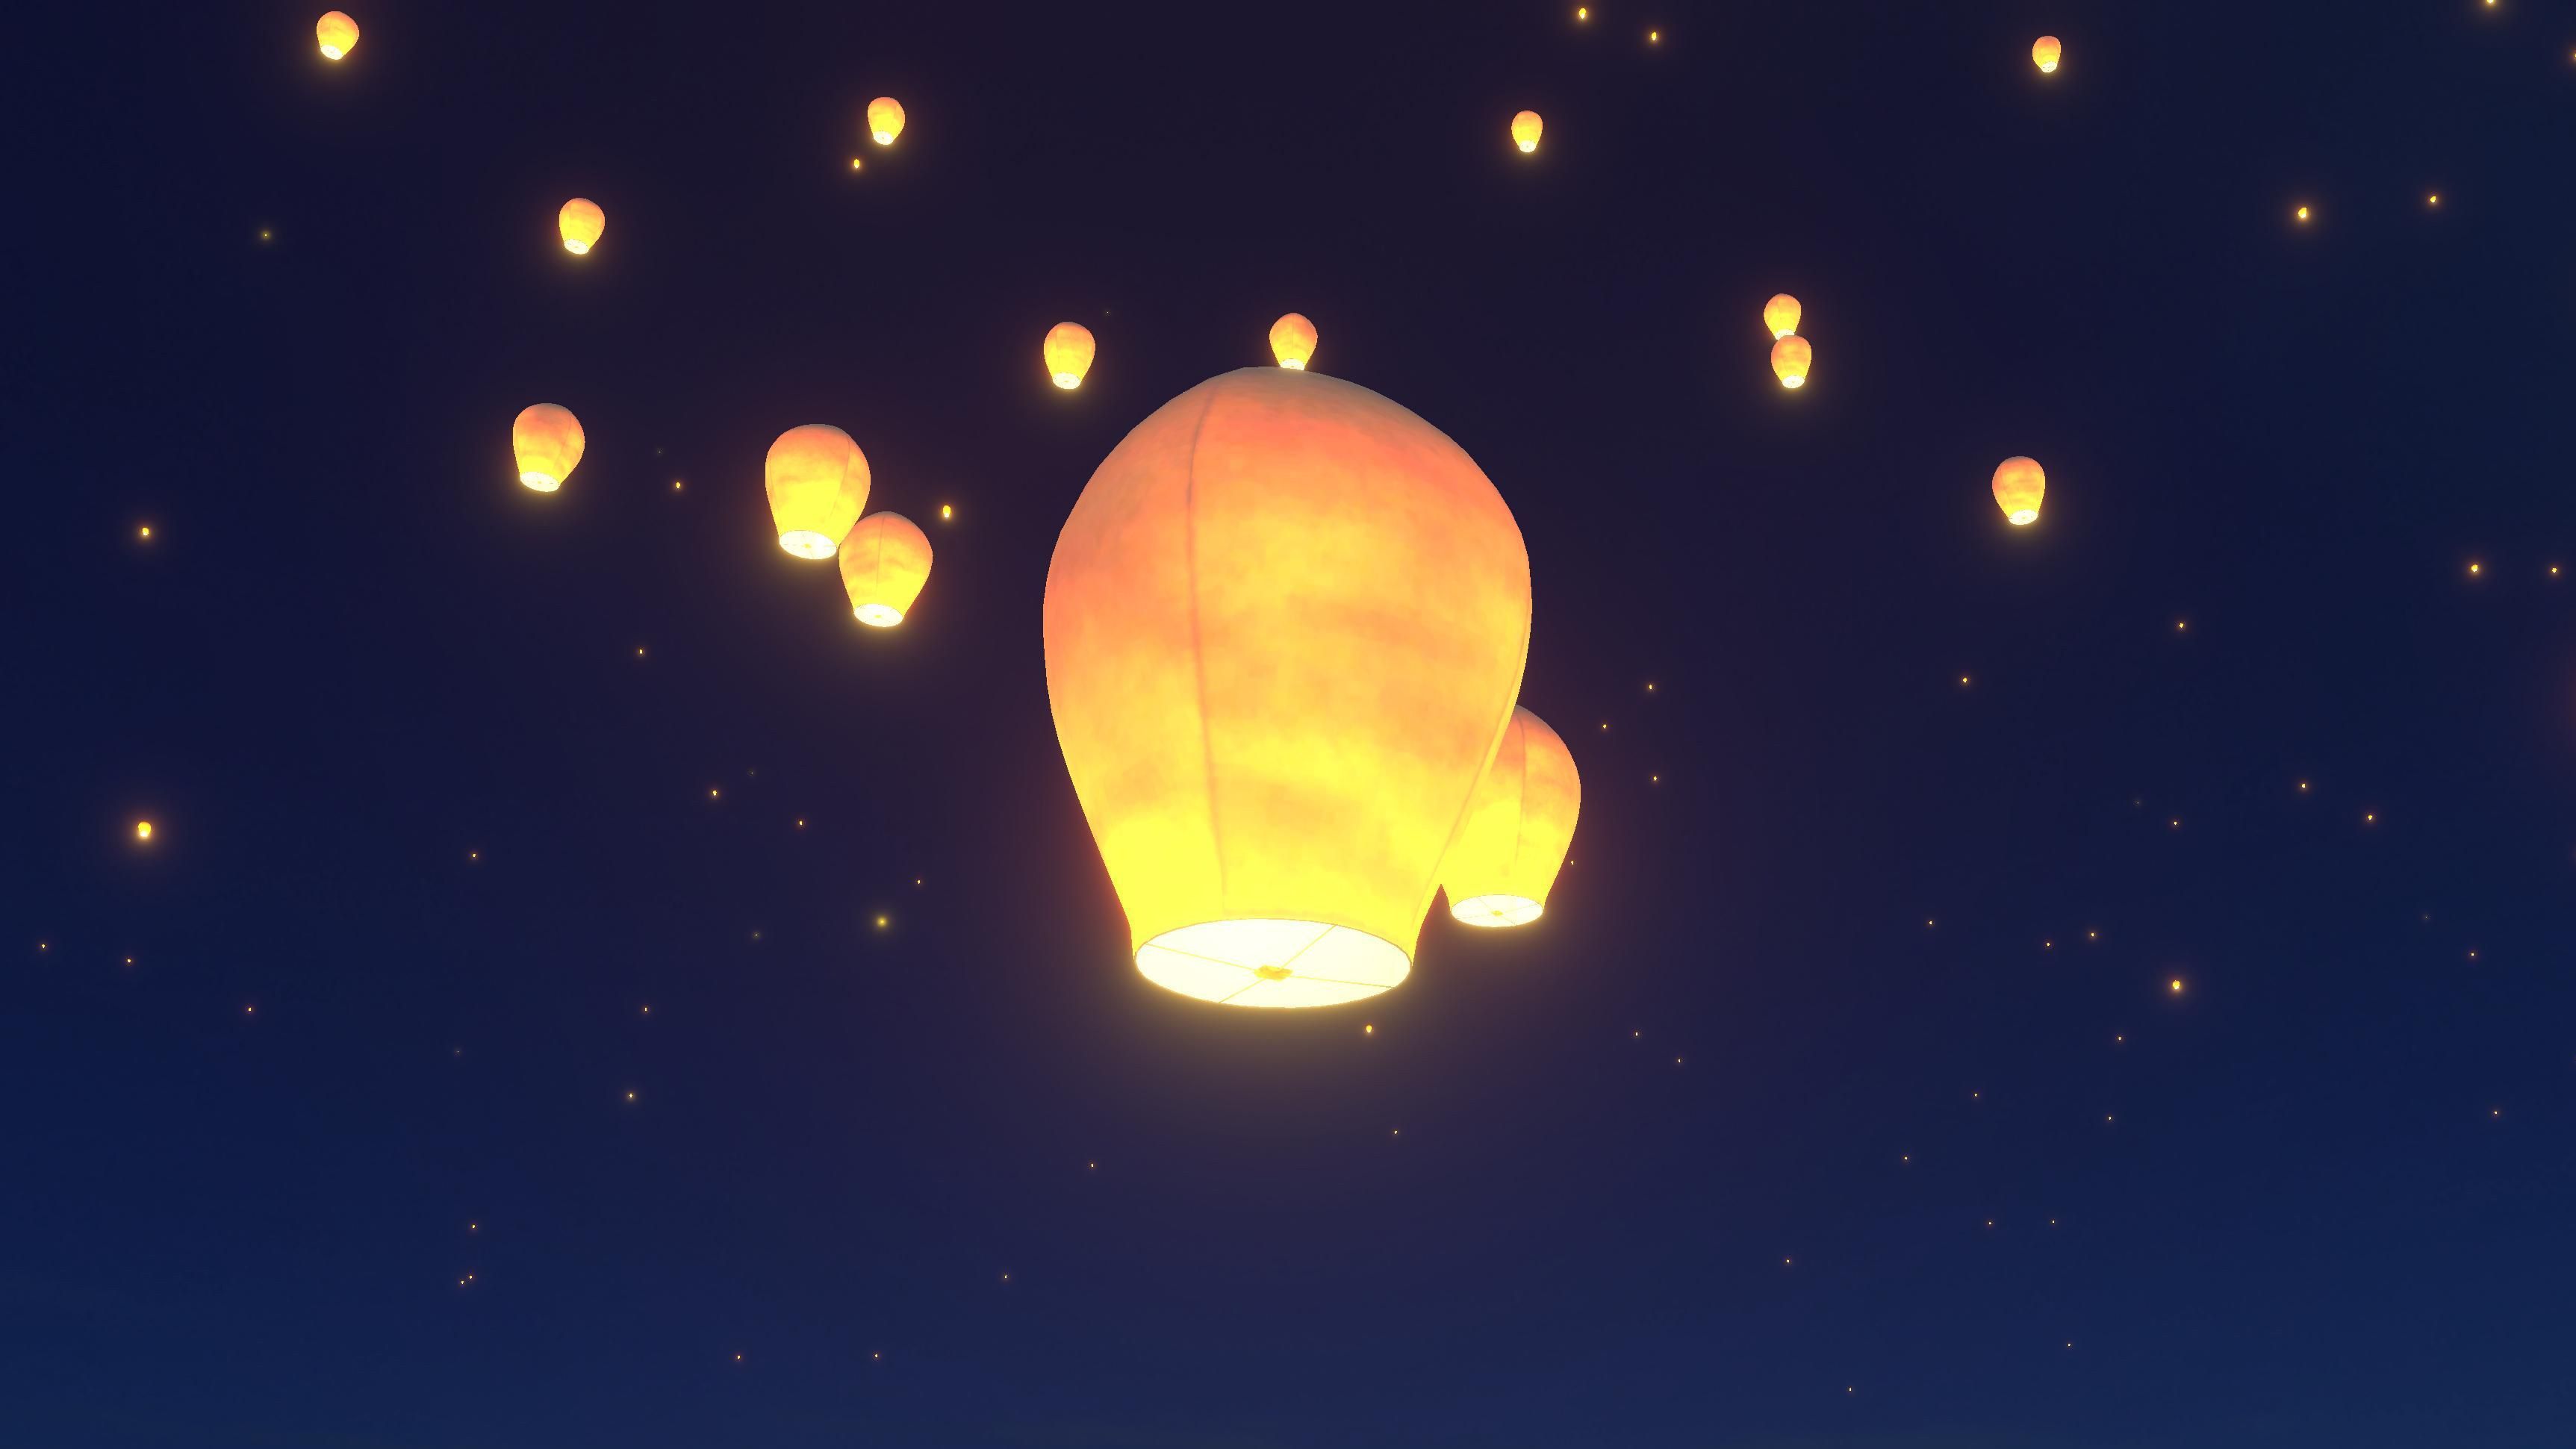 The wishes of the event's participants transform into lanterns that rise in the WE ARE WISHES™ animation.